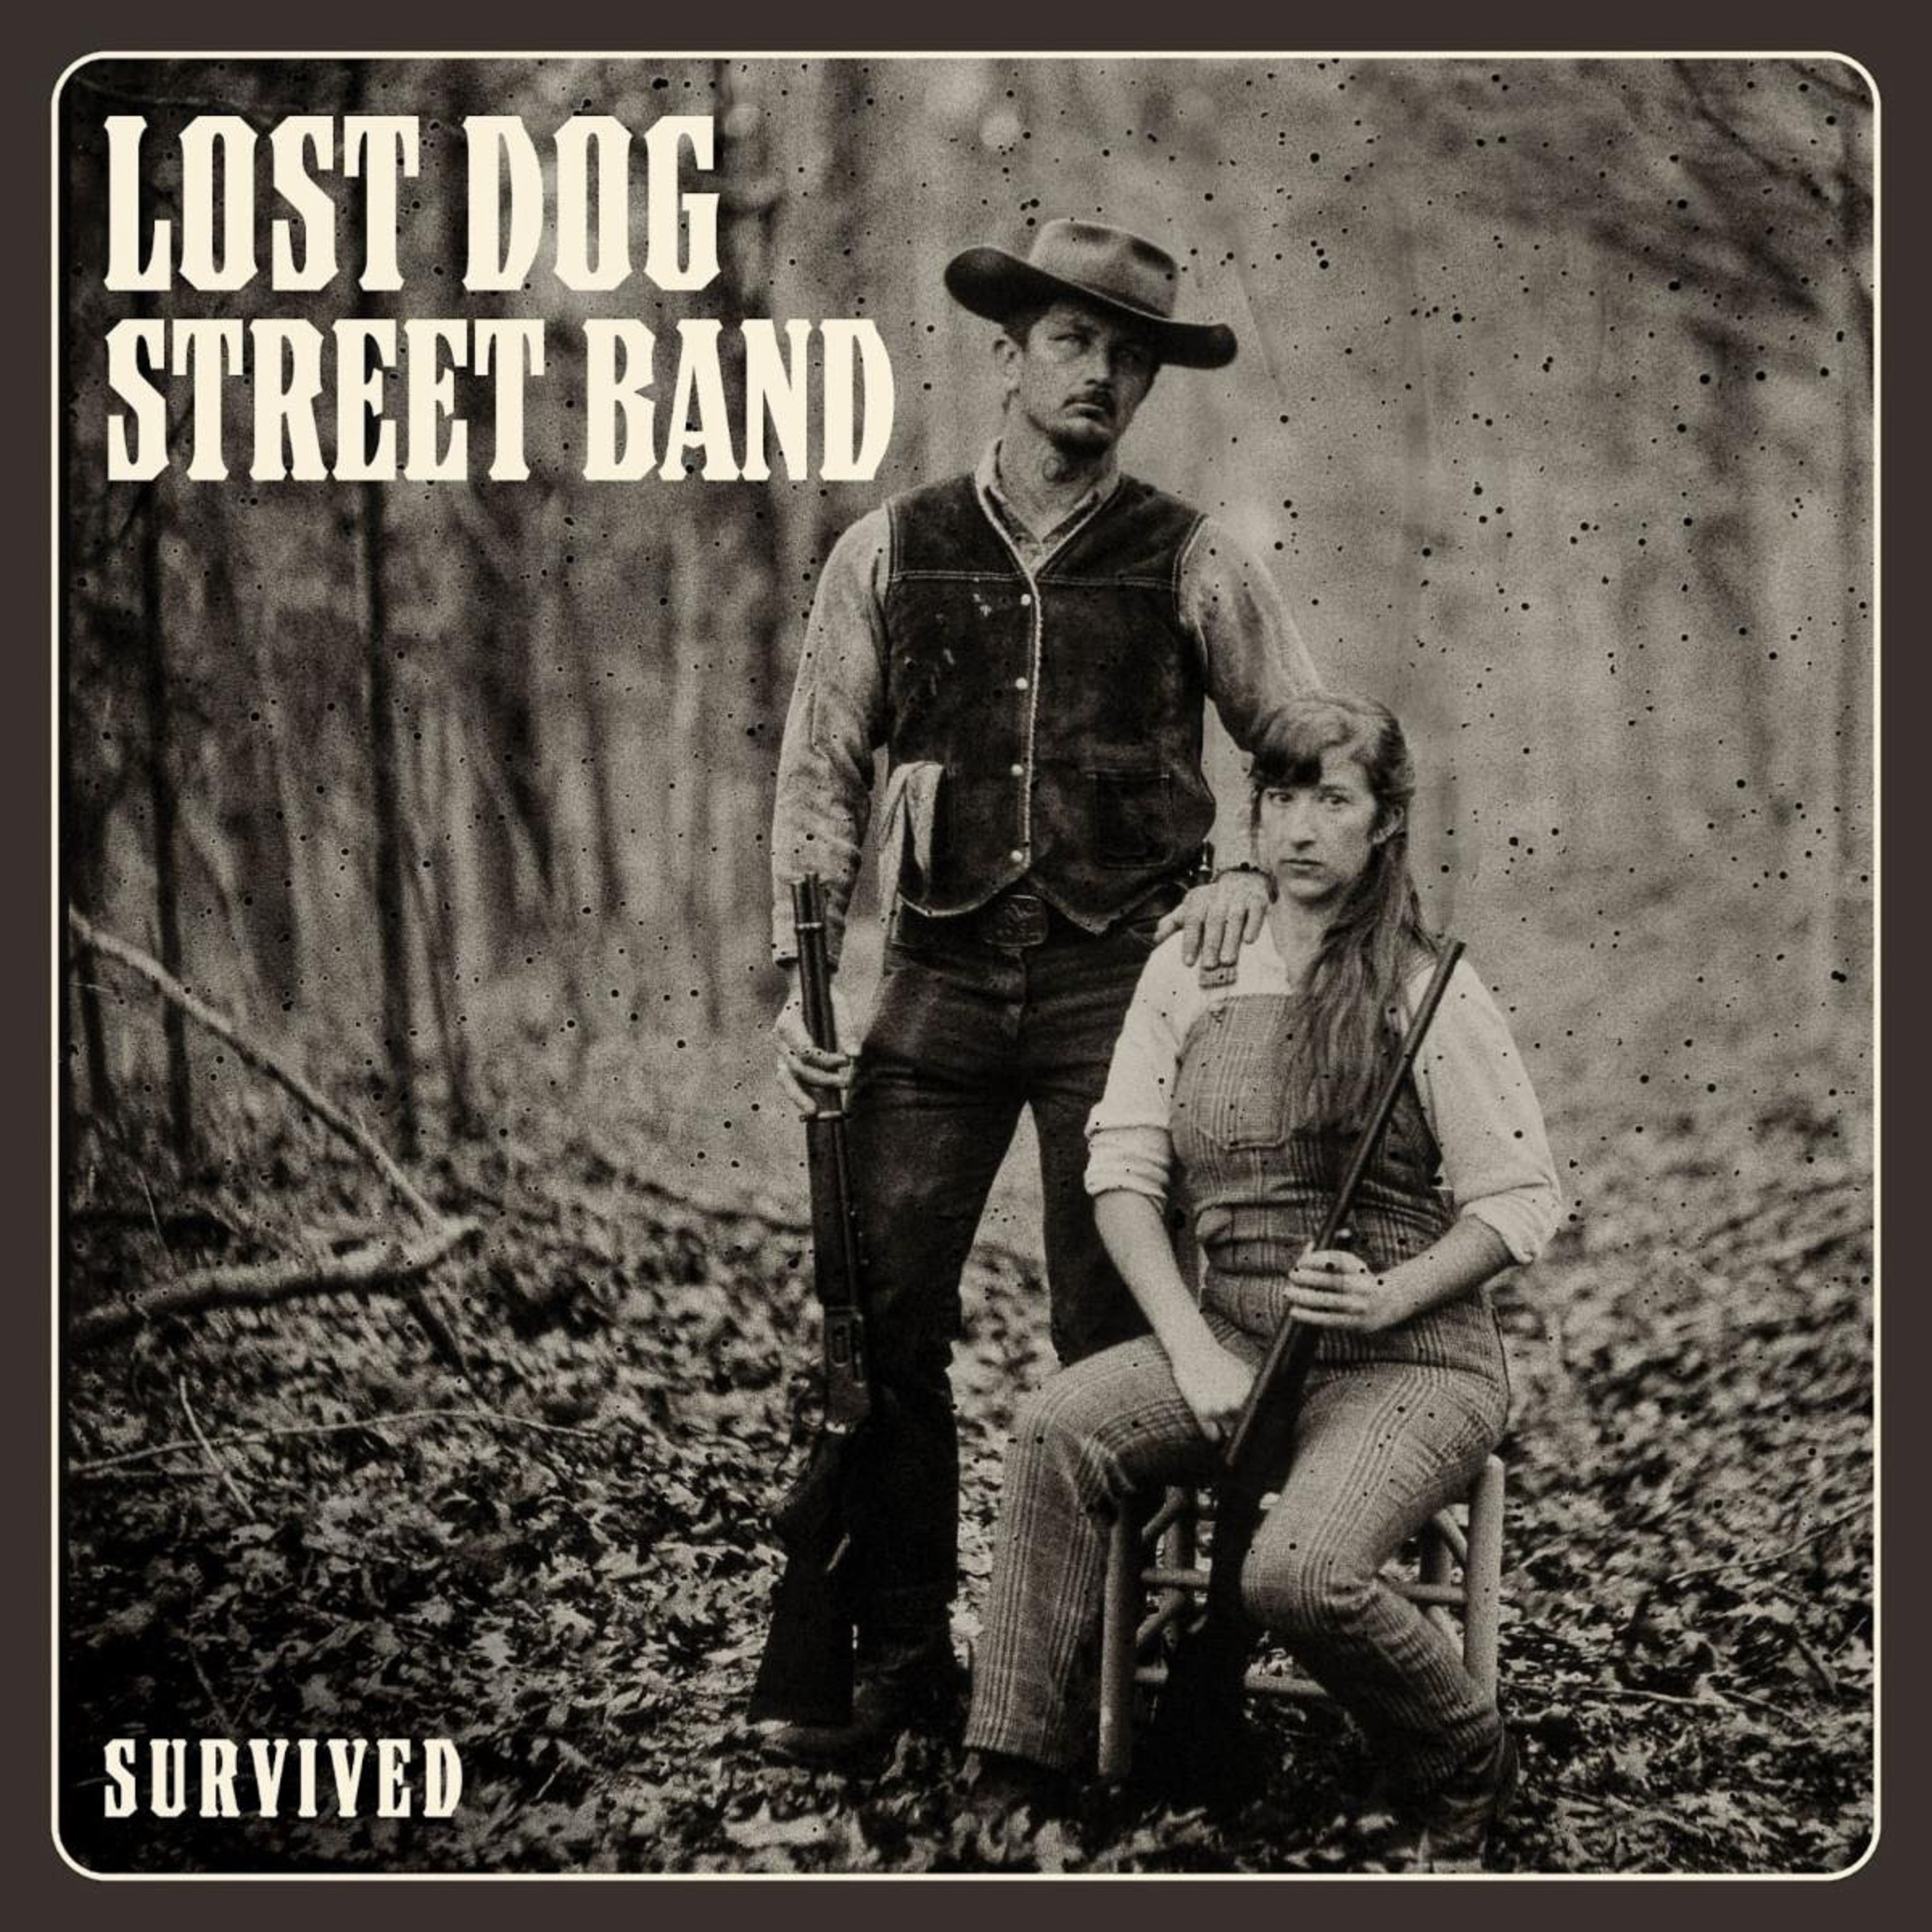 Lost Dog Street Band Rise From The Ashes With The Announcement Of Survived, A Brand New Ten Song LP Coming Out On April 26th